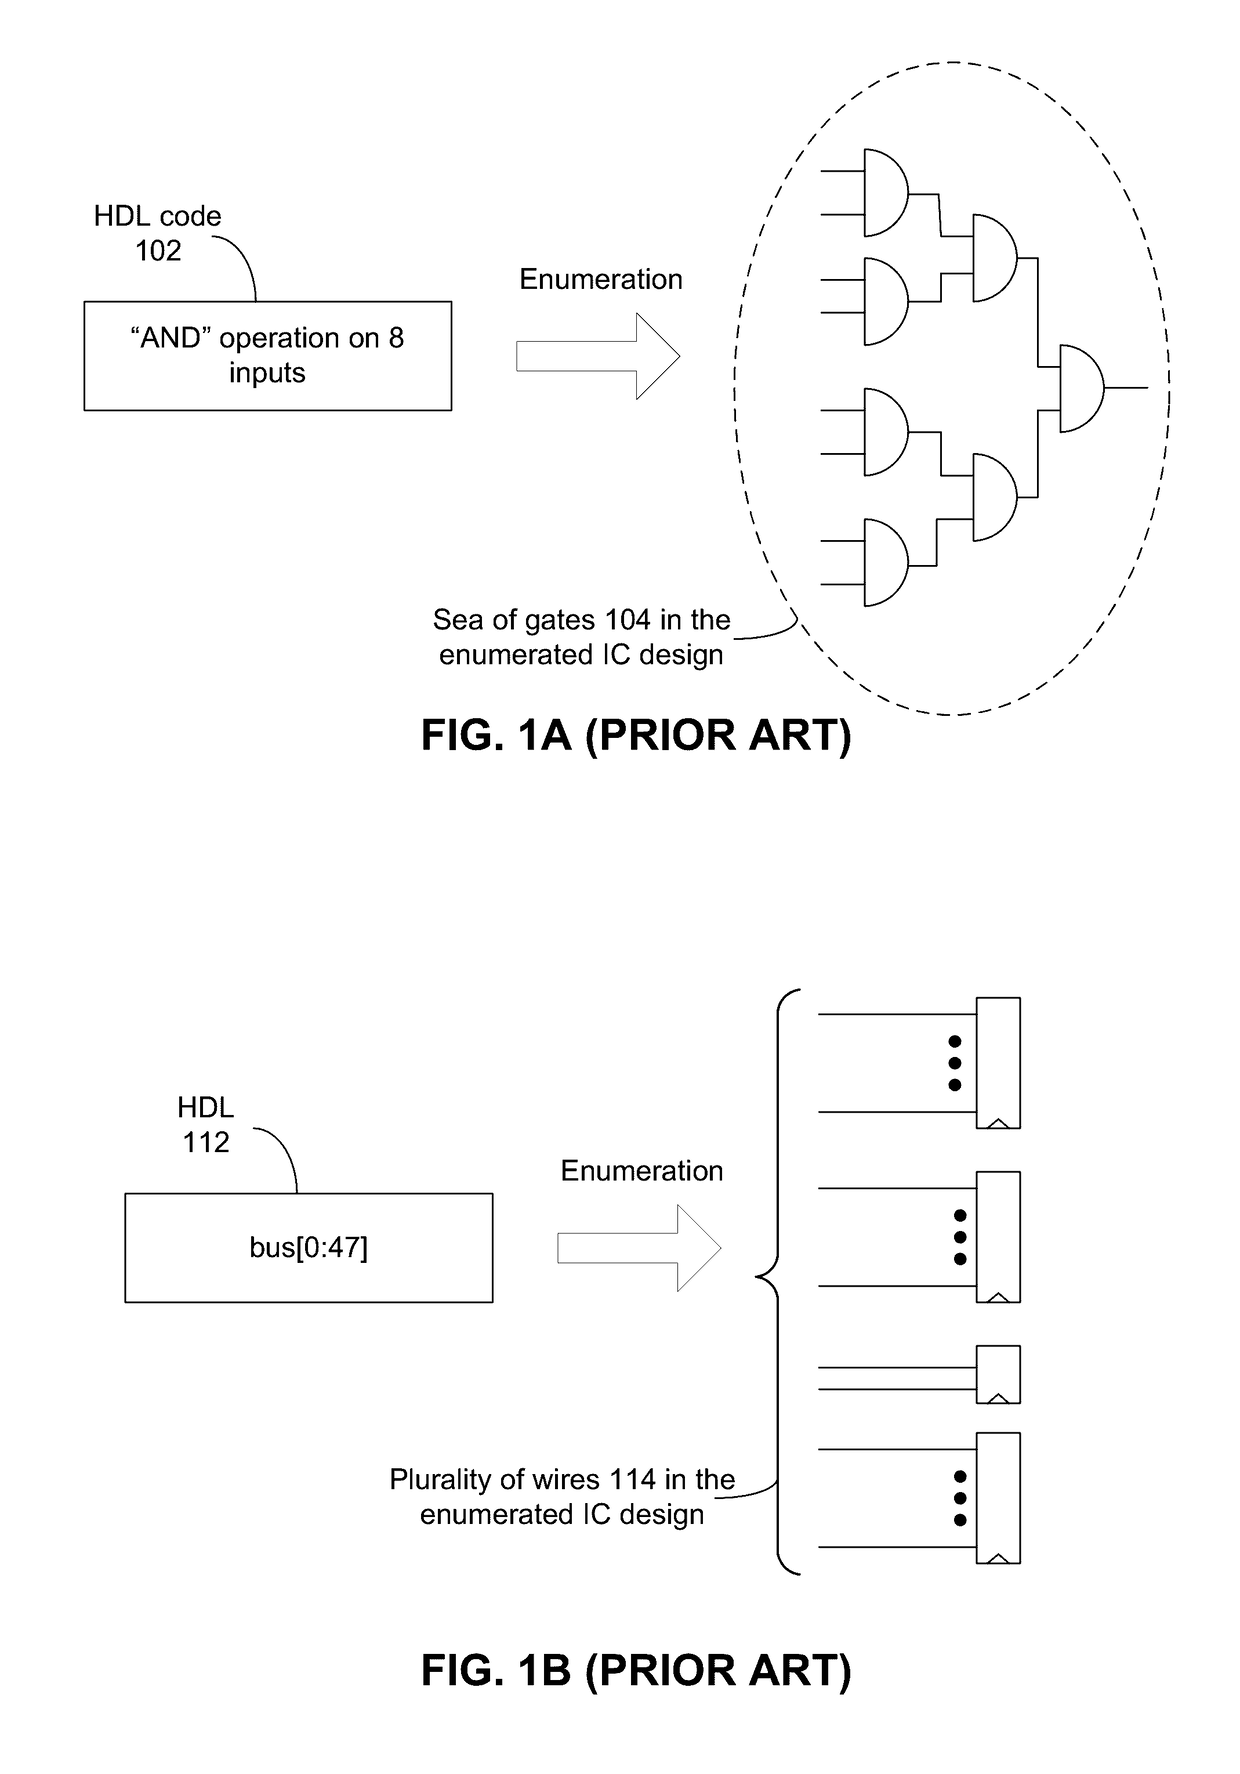 Creating and using a wide-bus data structure to represent a wide-bus in an integrated circuit (IC) design